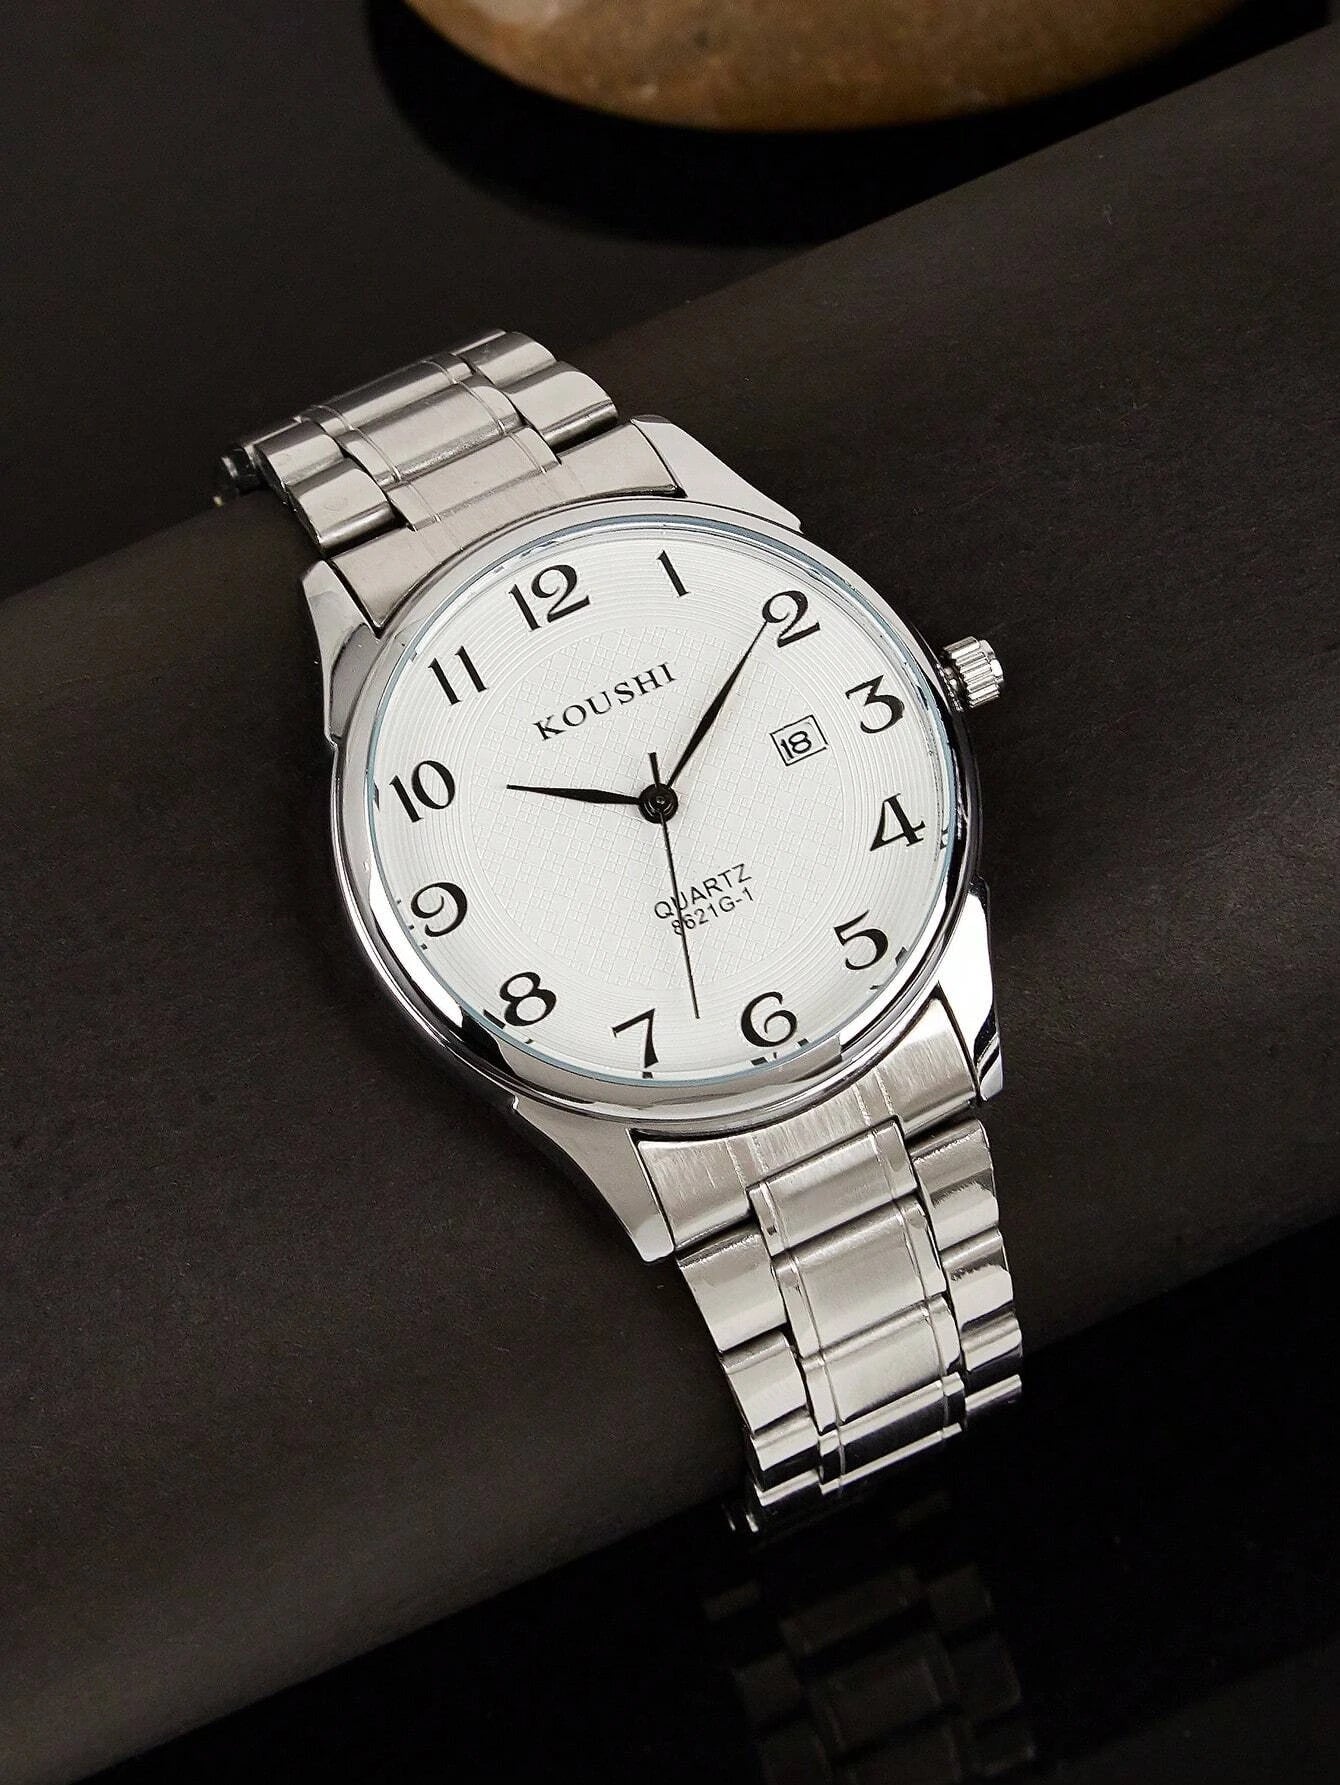 1pc Men Silver Zinc Alloy Strap Business Date Water Resistant Round Dial Quartz Watch, For Daily Life